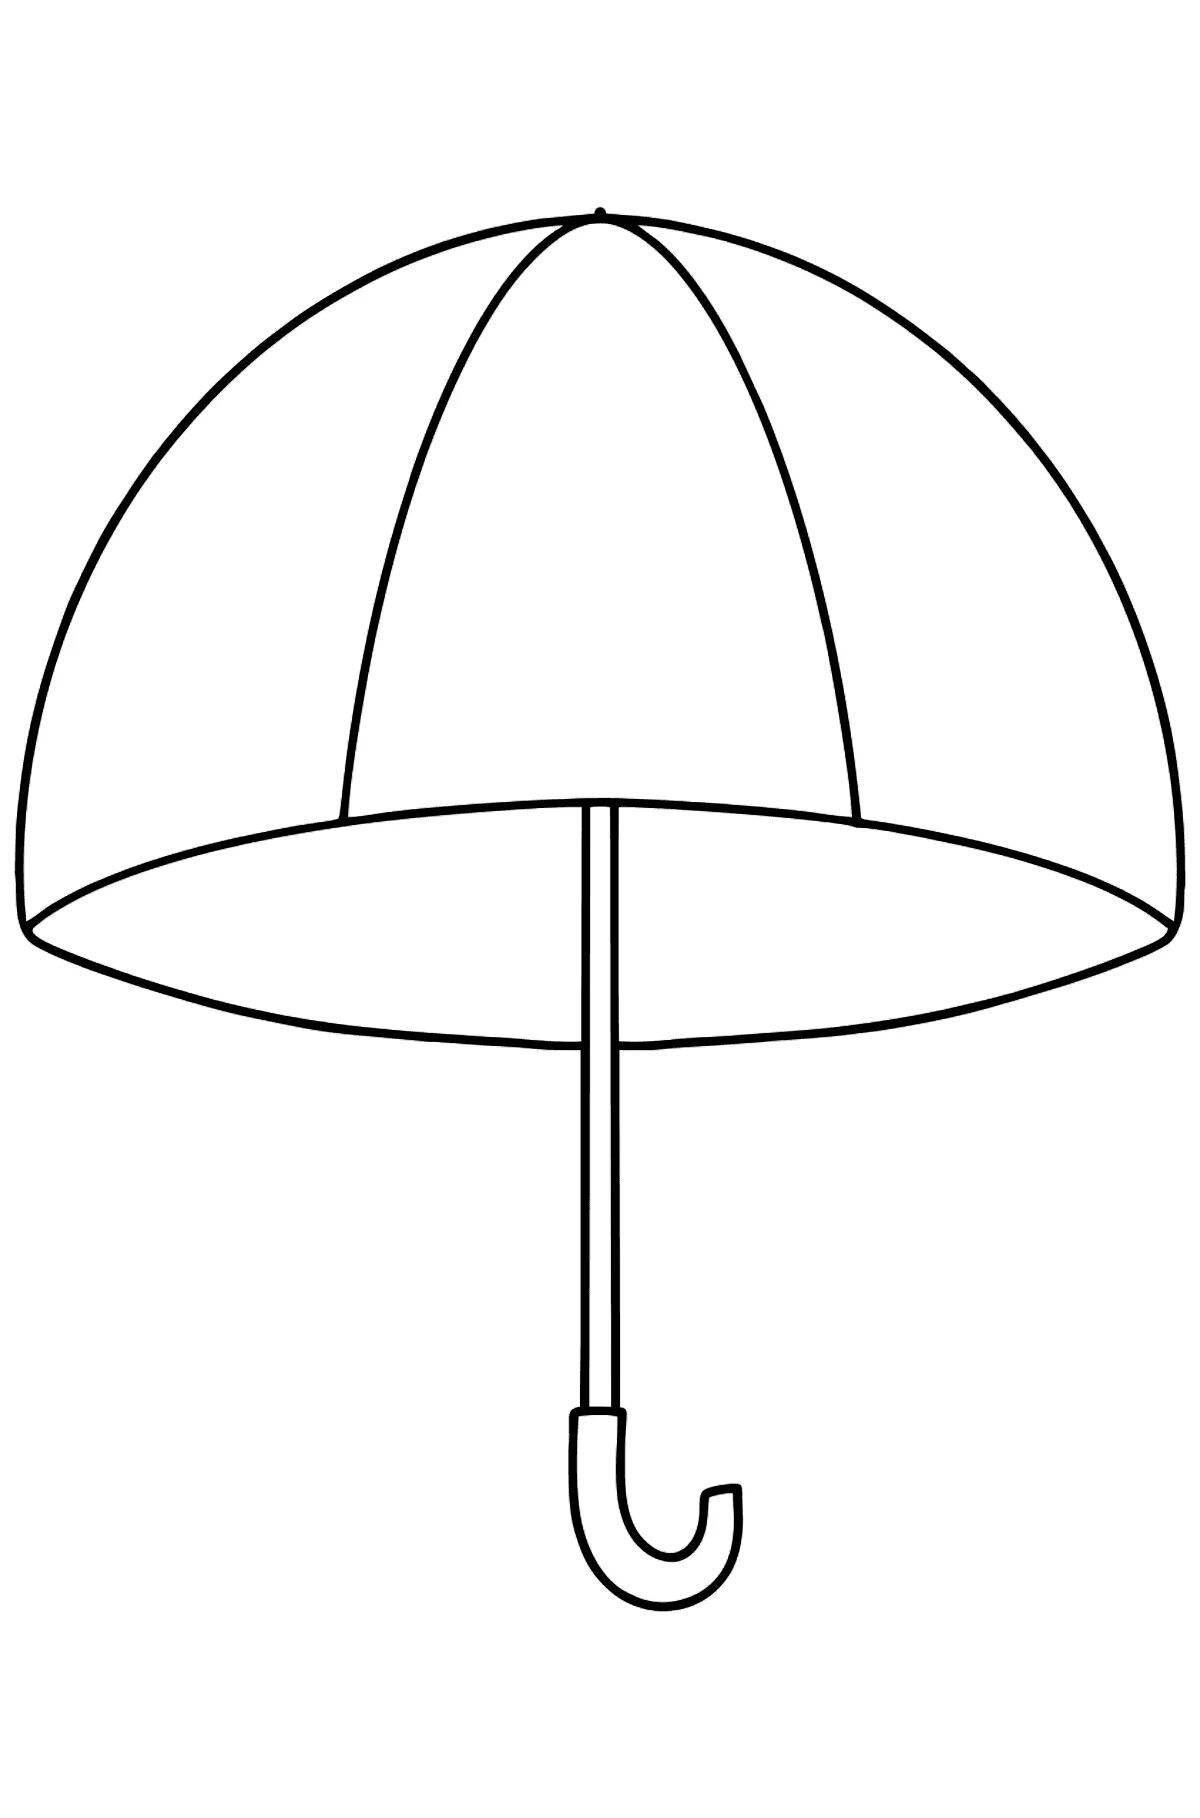 Crazy umbrella coloring pages for 3-4 year olds